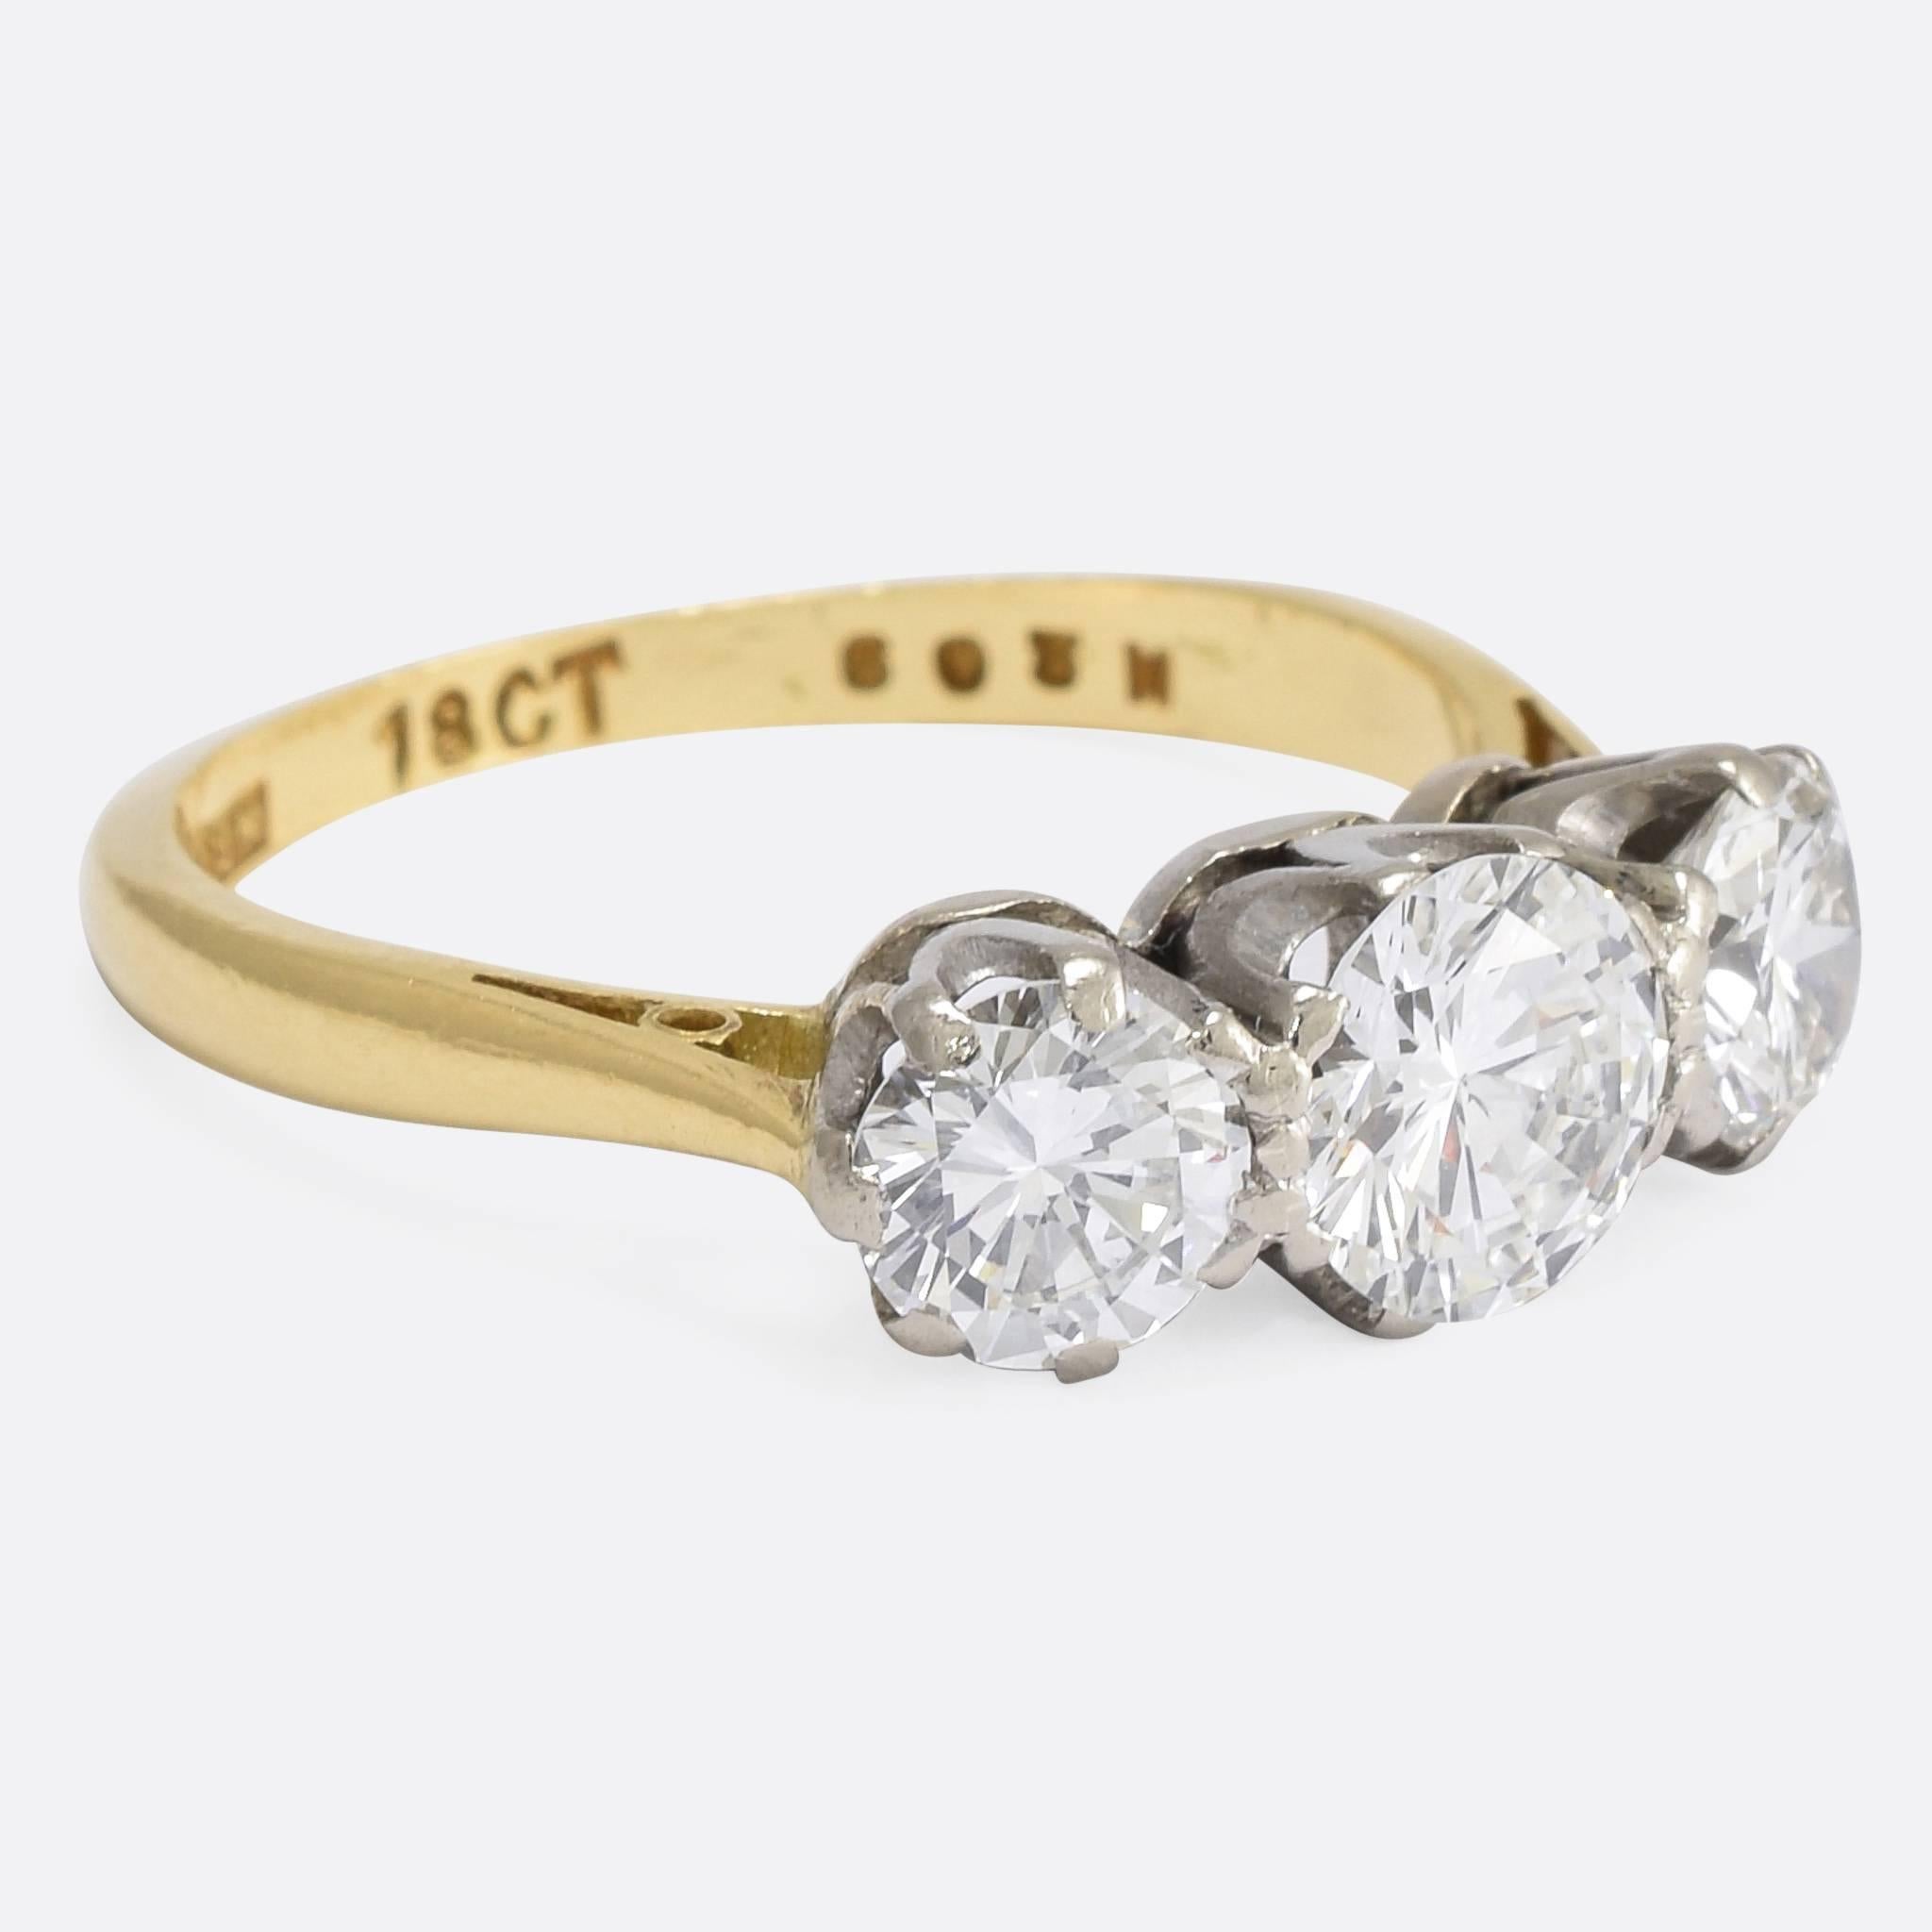 This superb Art Deco Trilogy ring is set with three brilliant cut diamonds, of excellent clarity and colour, with a total weigh of 1.82 carats. It's modelled in 18k gold with platinum settings, wonderfully proportioned with exceptionally good